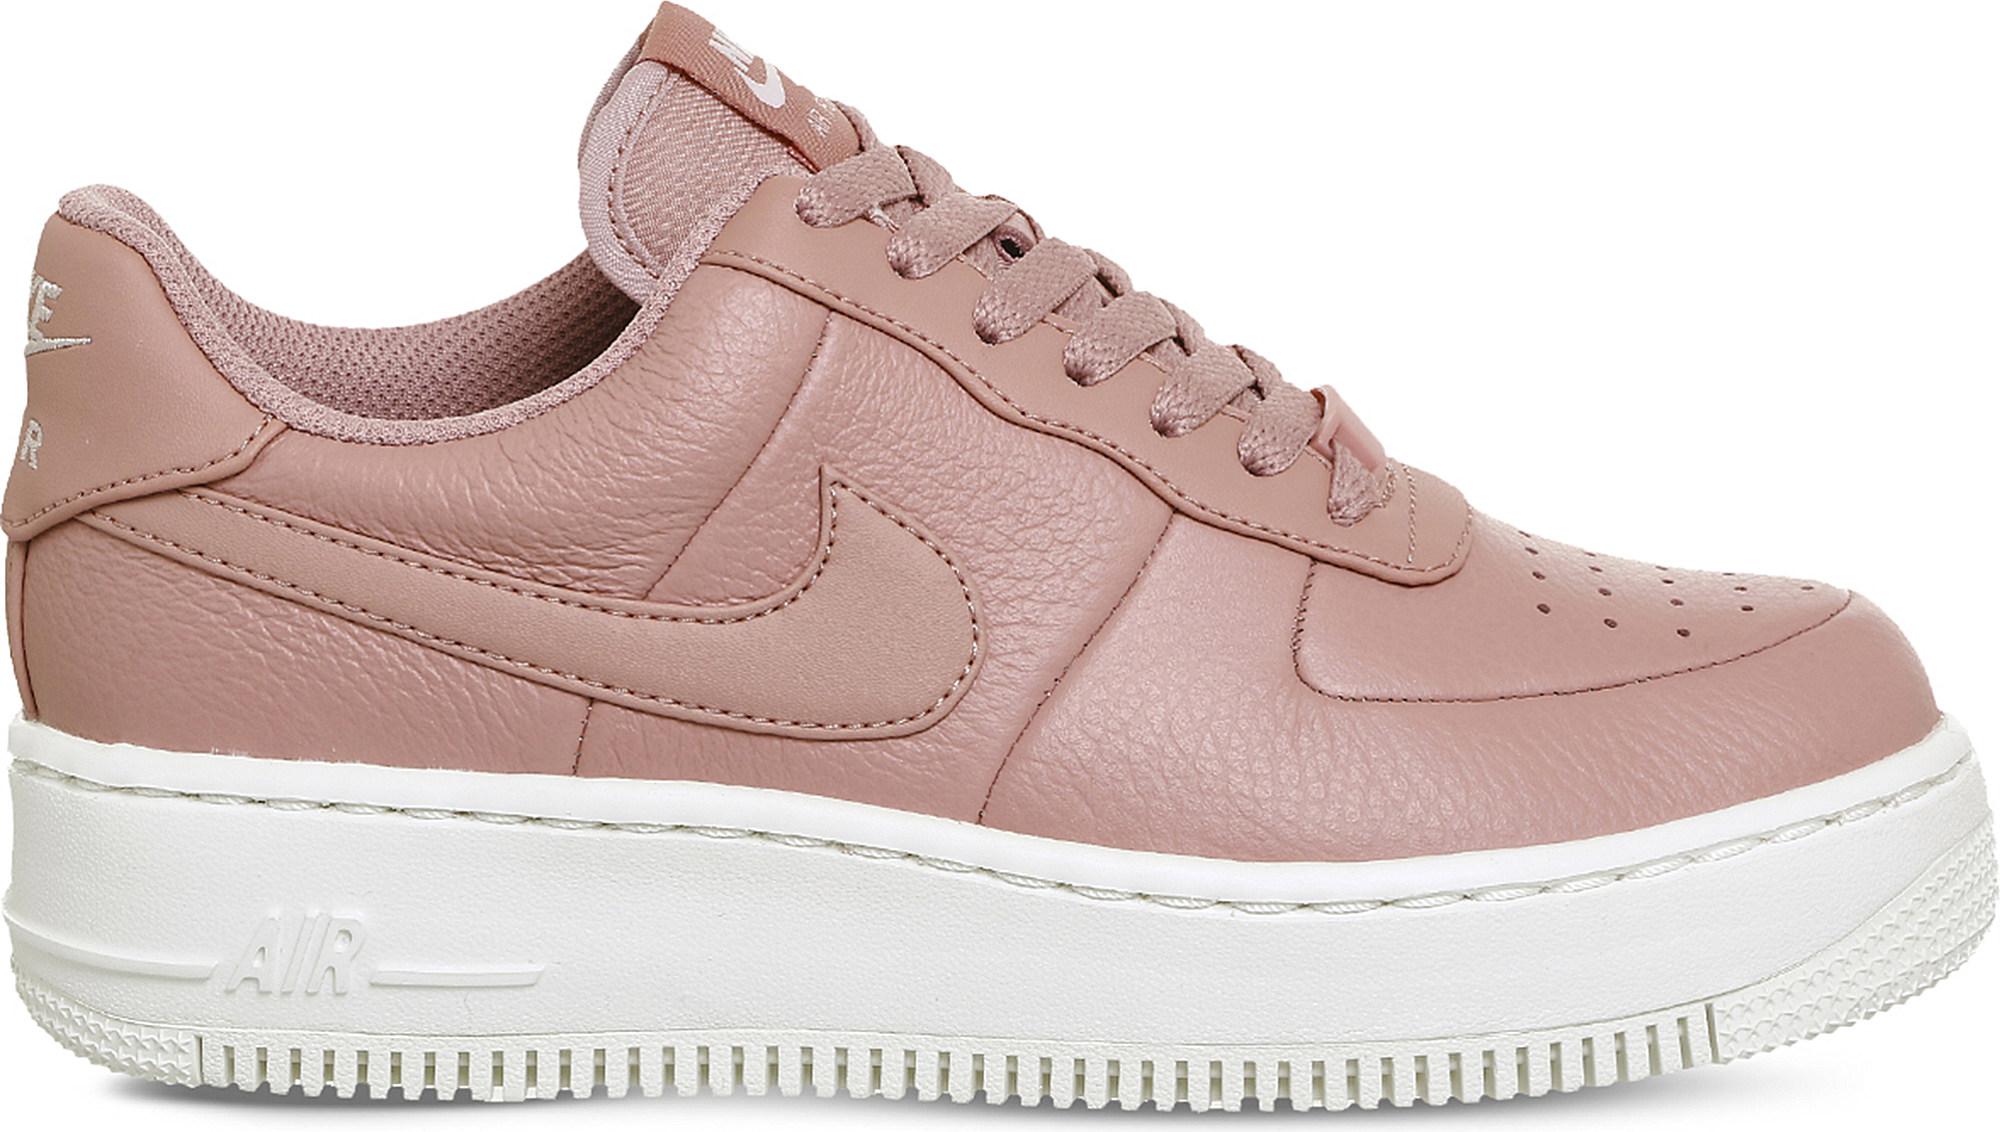 nike air force 1 pink leather online -